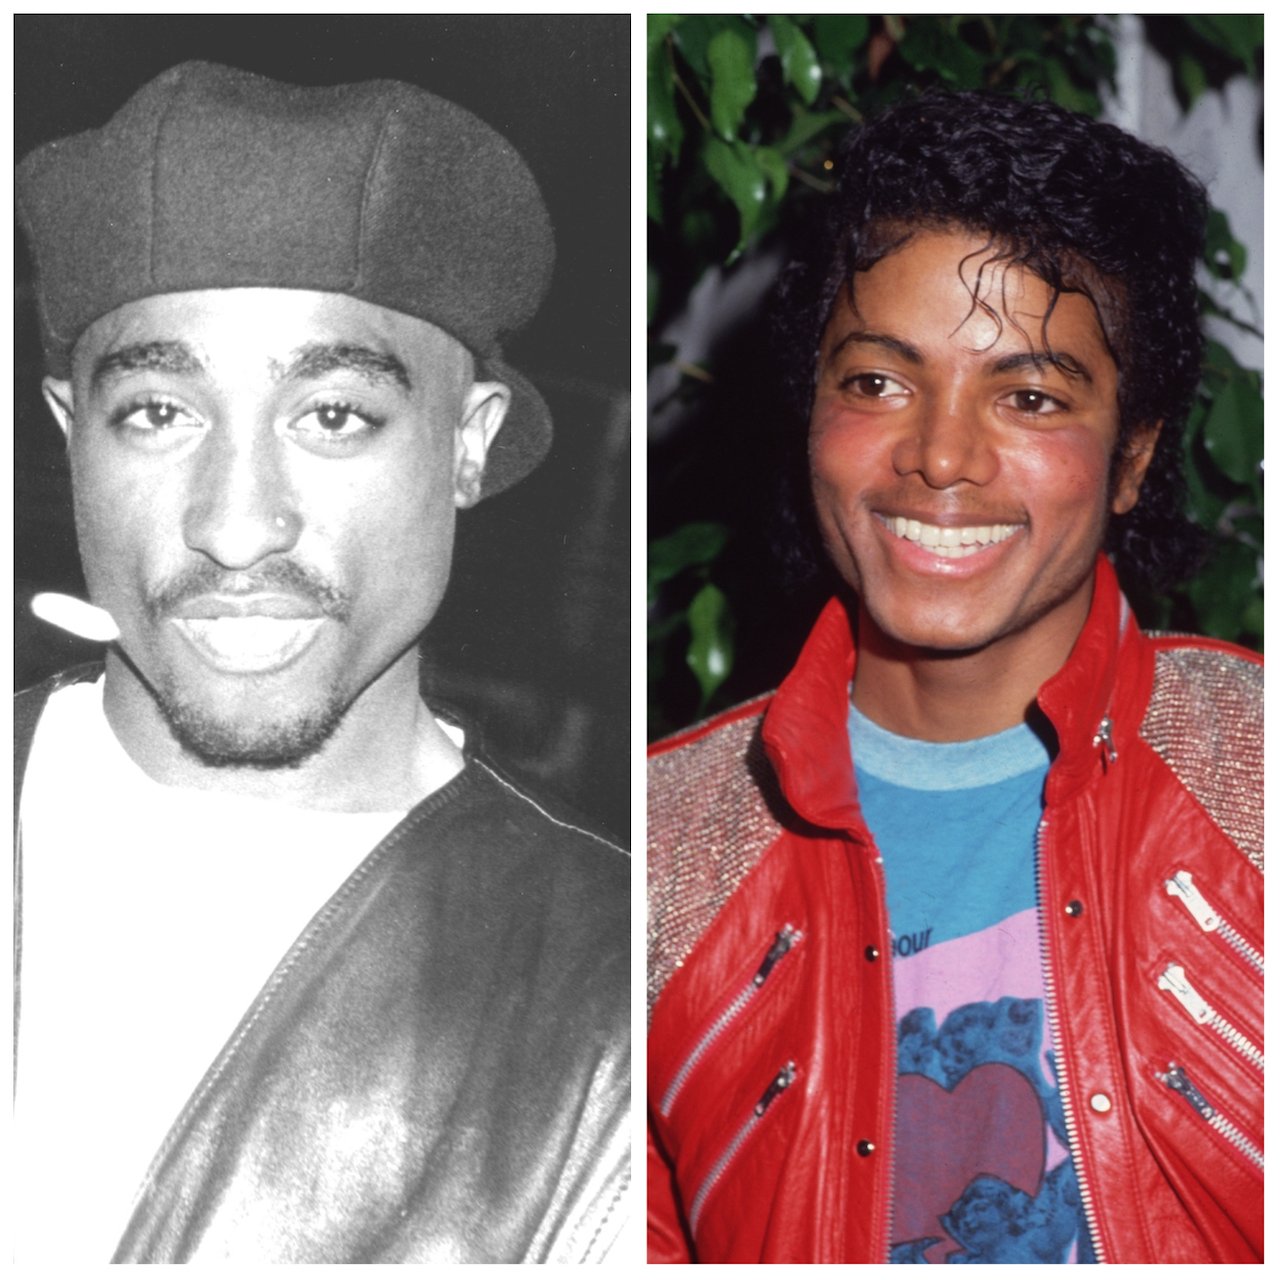 Tupac Shakur and Michael Jackson pose for separate photos; Tupac reportedly cancelled a collaboration with Jackson when Jackson skipped a recording session